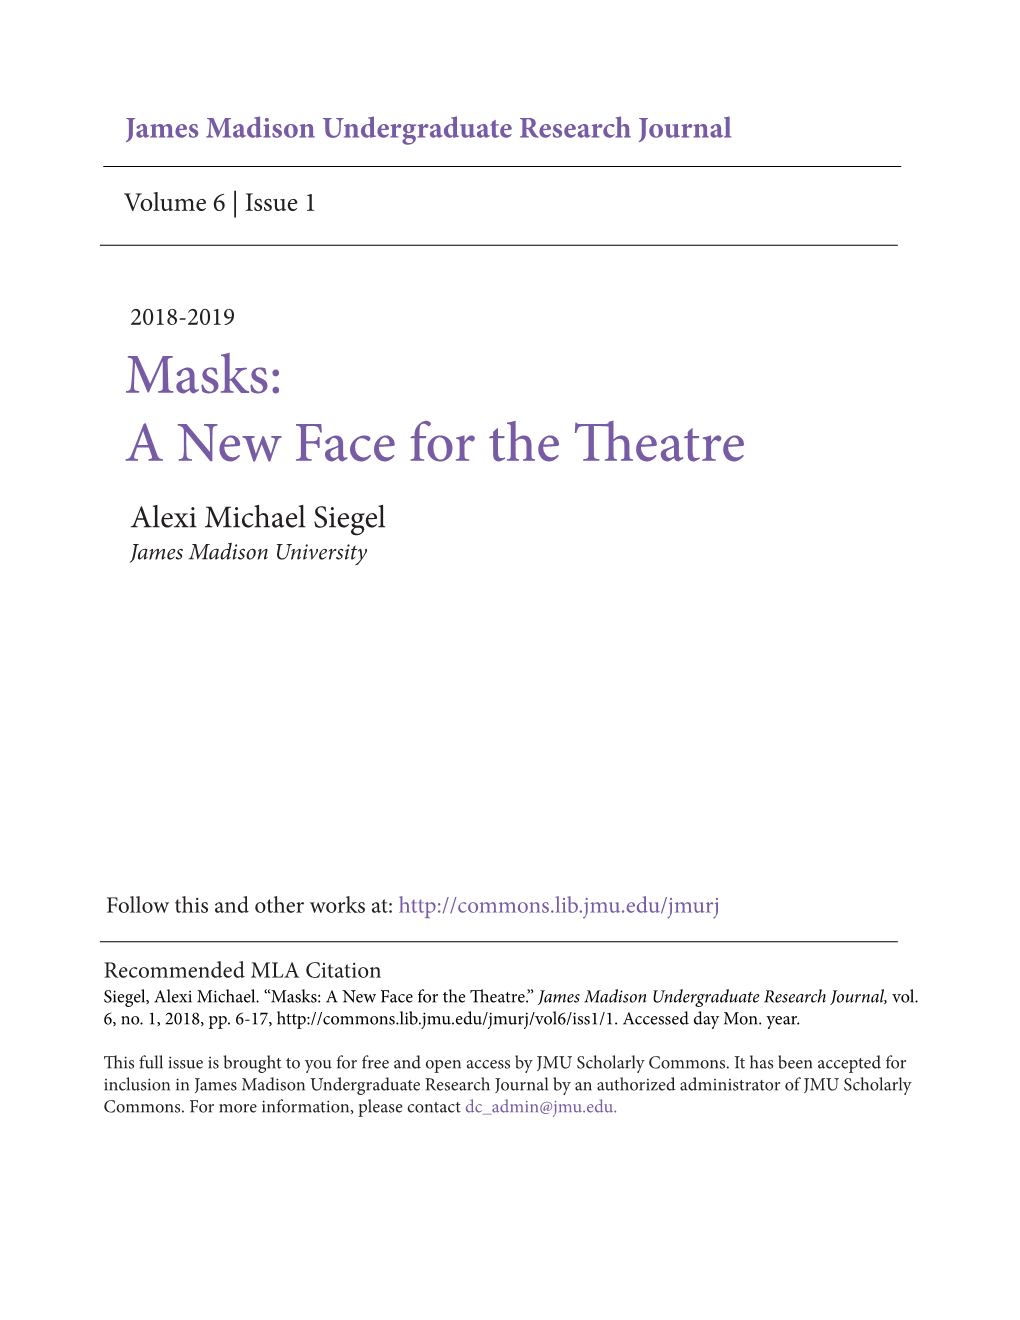 Masks: a New Face for the Theatre Alexi Michael Siegel James Madison University